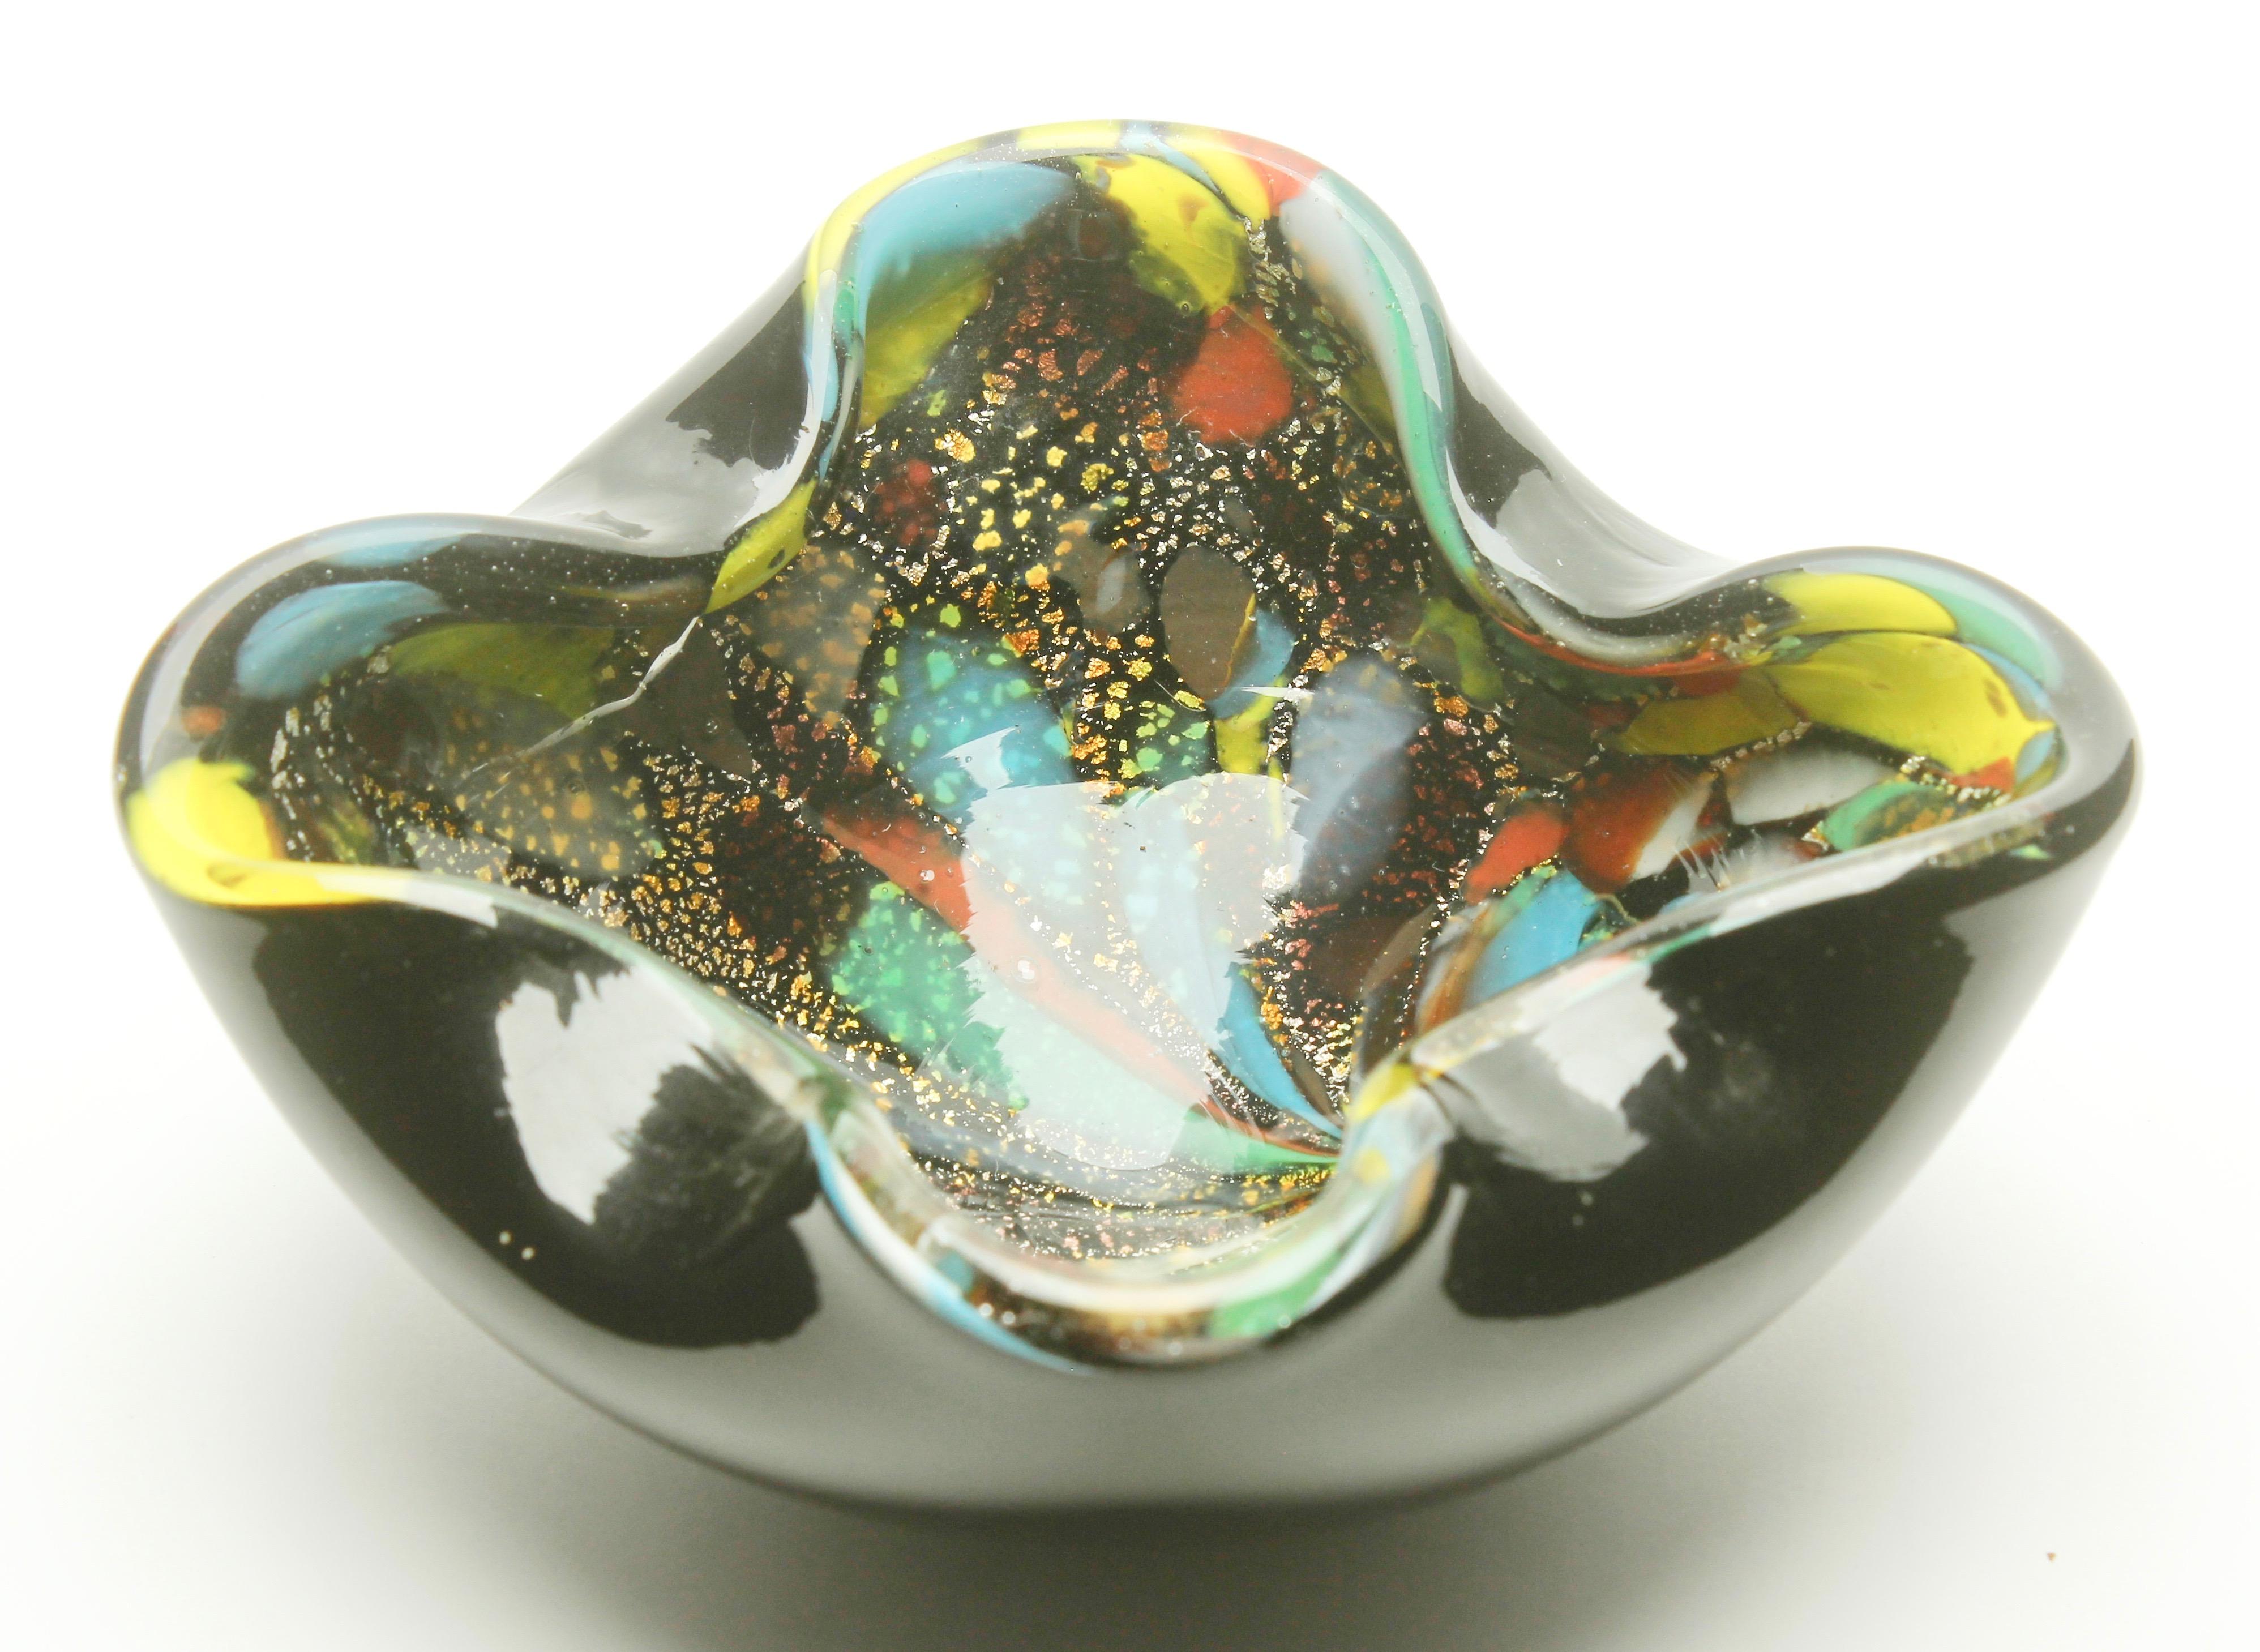 Italian Murano Art Glass Bowl Black Shell, Metals and Bright Colors, Attributed to AVEM